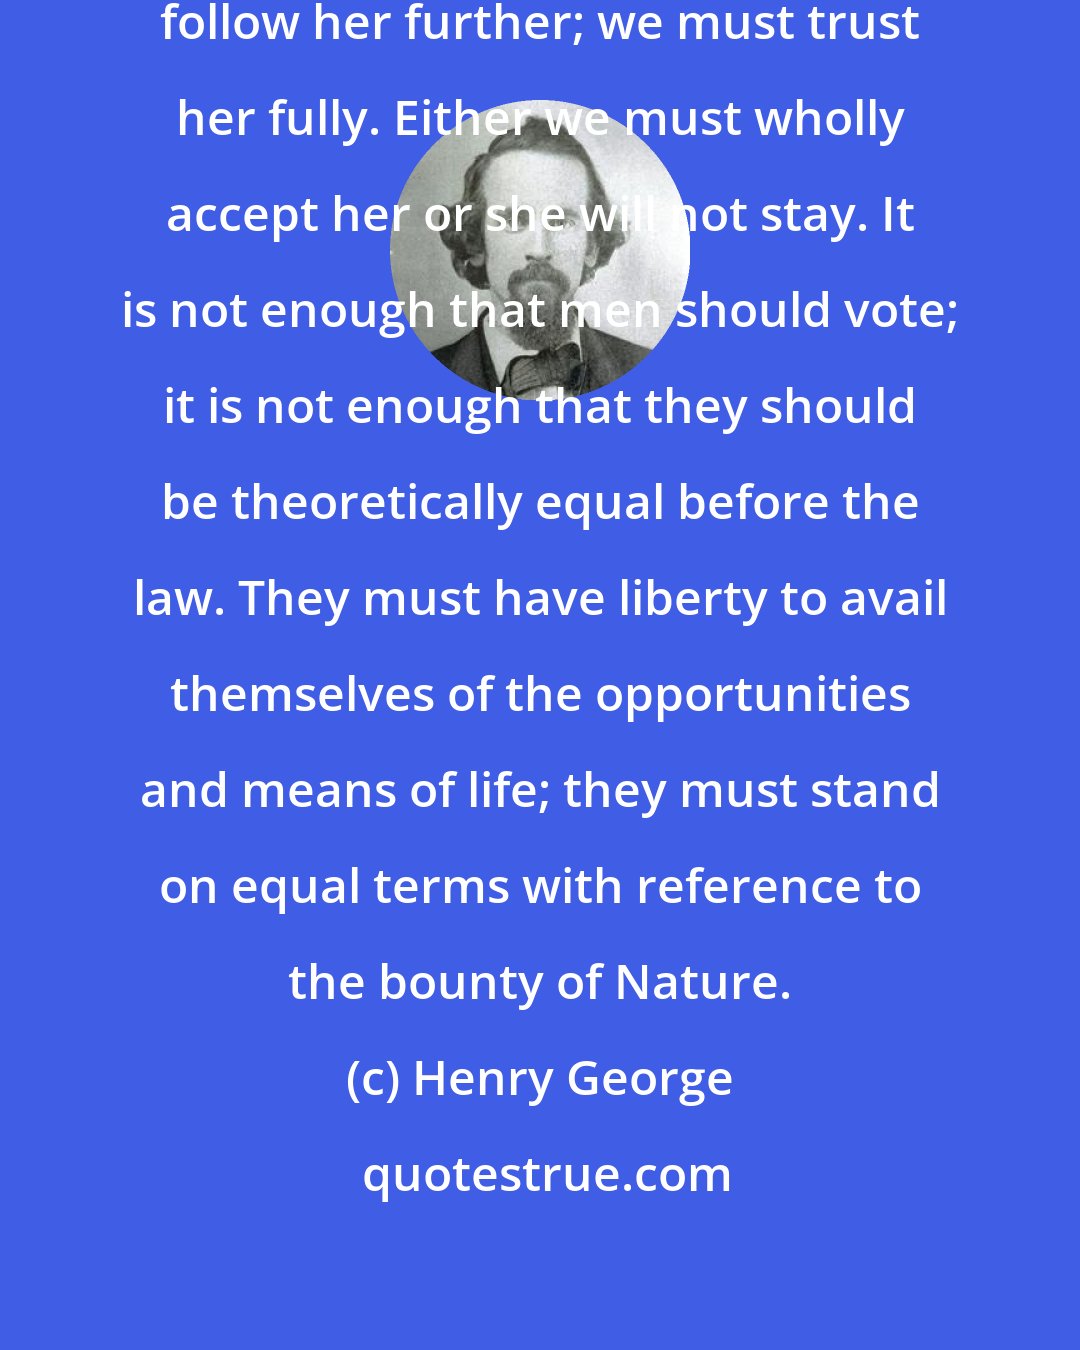 Henry George: Liberty calls to us again. We must follow her further; we must trust her fully. Either we must wholly accept her or she will not stay. It is not enough that men should vote; it is not enough that they should be theoretically equal before the law. They must have liberty to avail themselves of the opportunities and means of life; they must stand on equal terms with reference to the bounty of Nature.